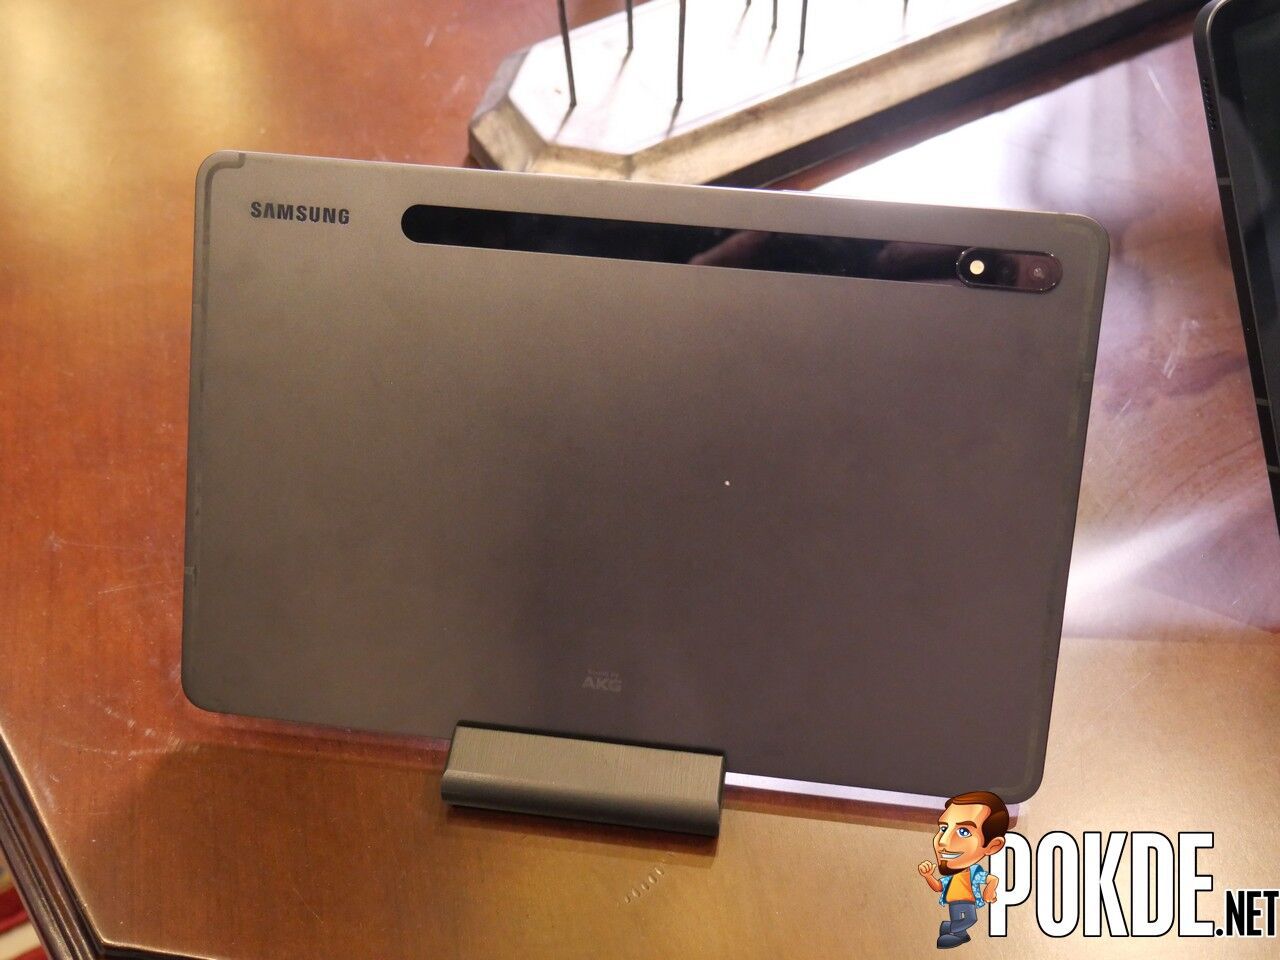 Samsung Galaxy Tab S8 Series Poses Serious Competition Against Laptops